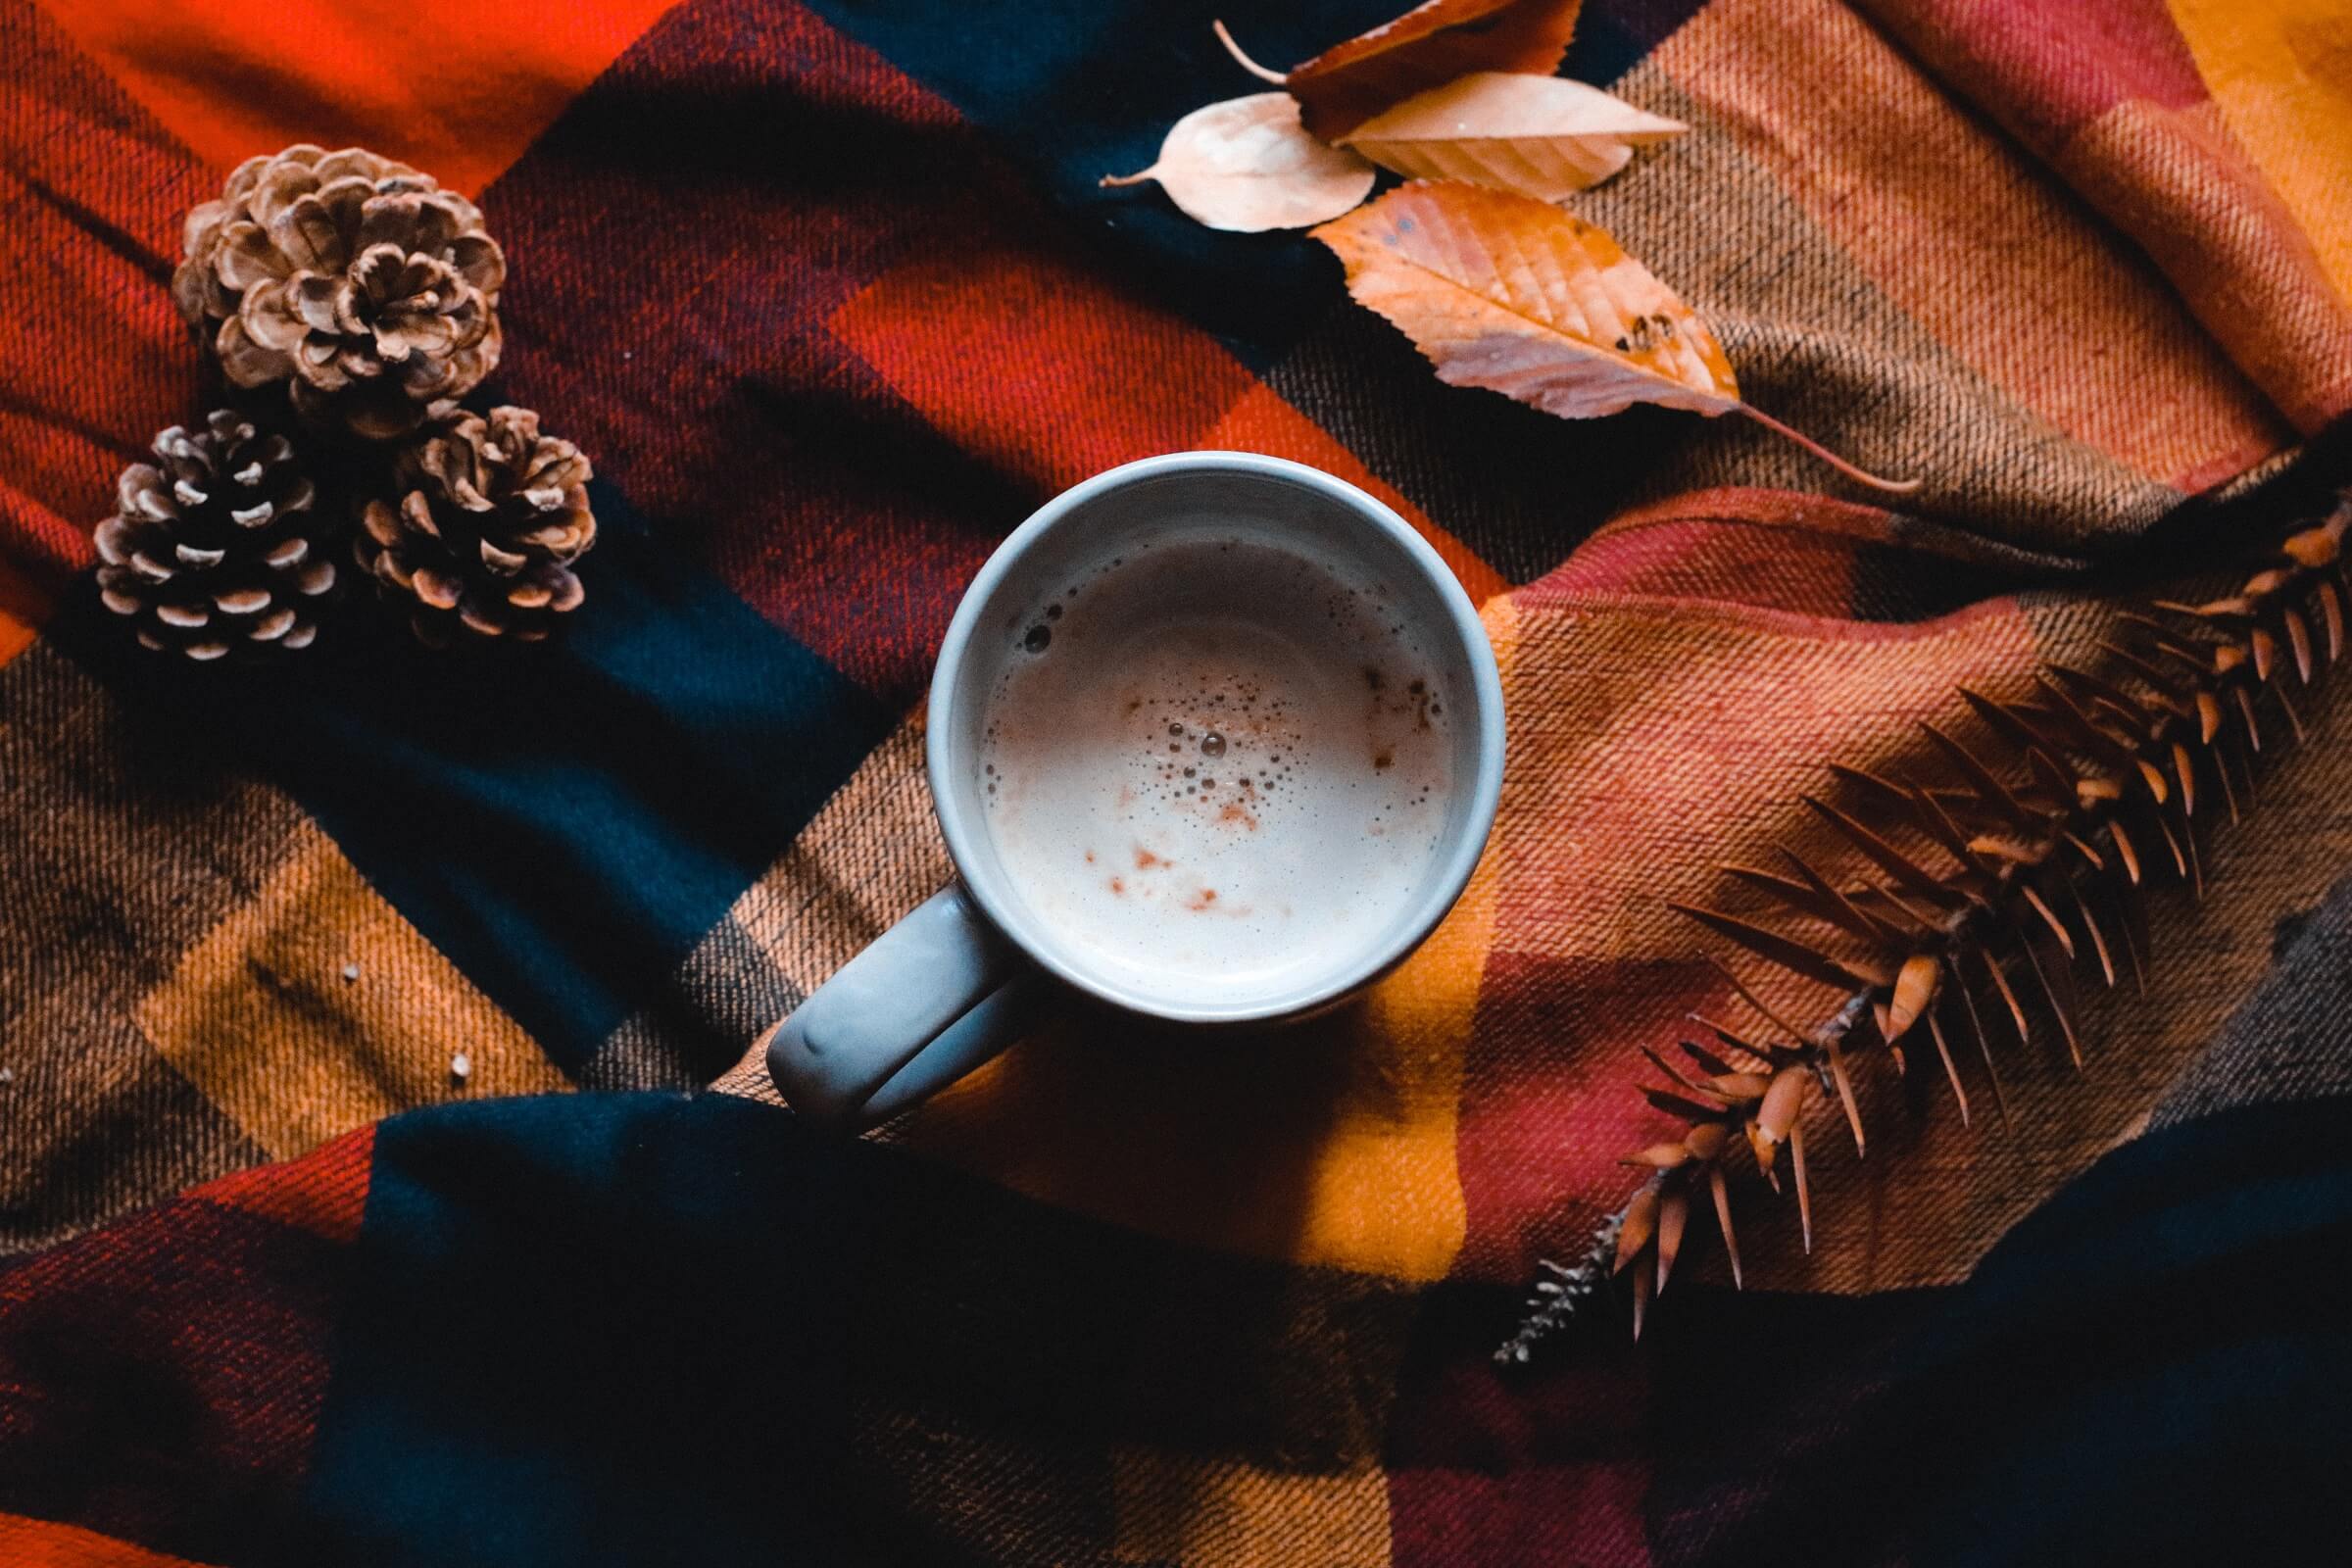 A mug of hot chocolate sits on a patterned scarf and is surrounded by scattered leaves and pinecones